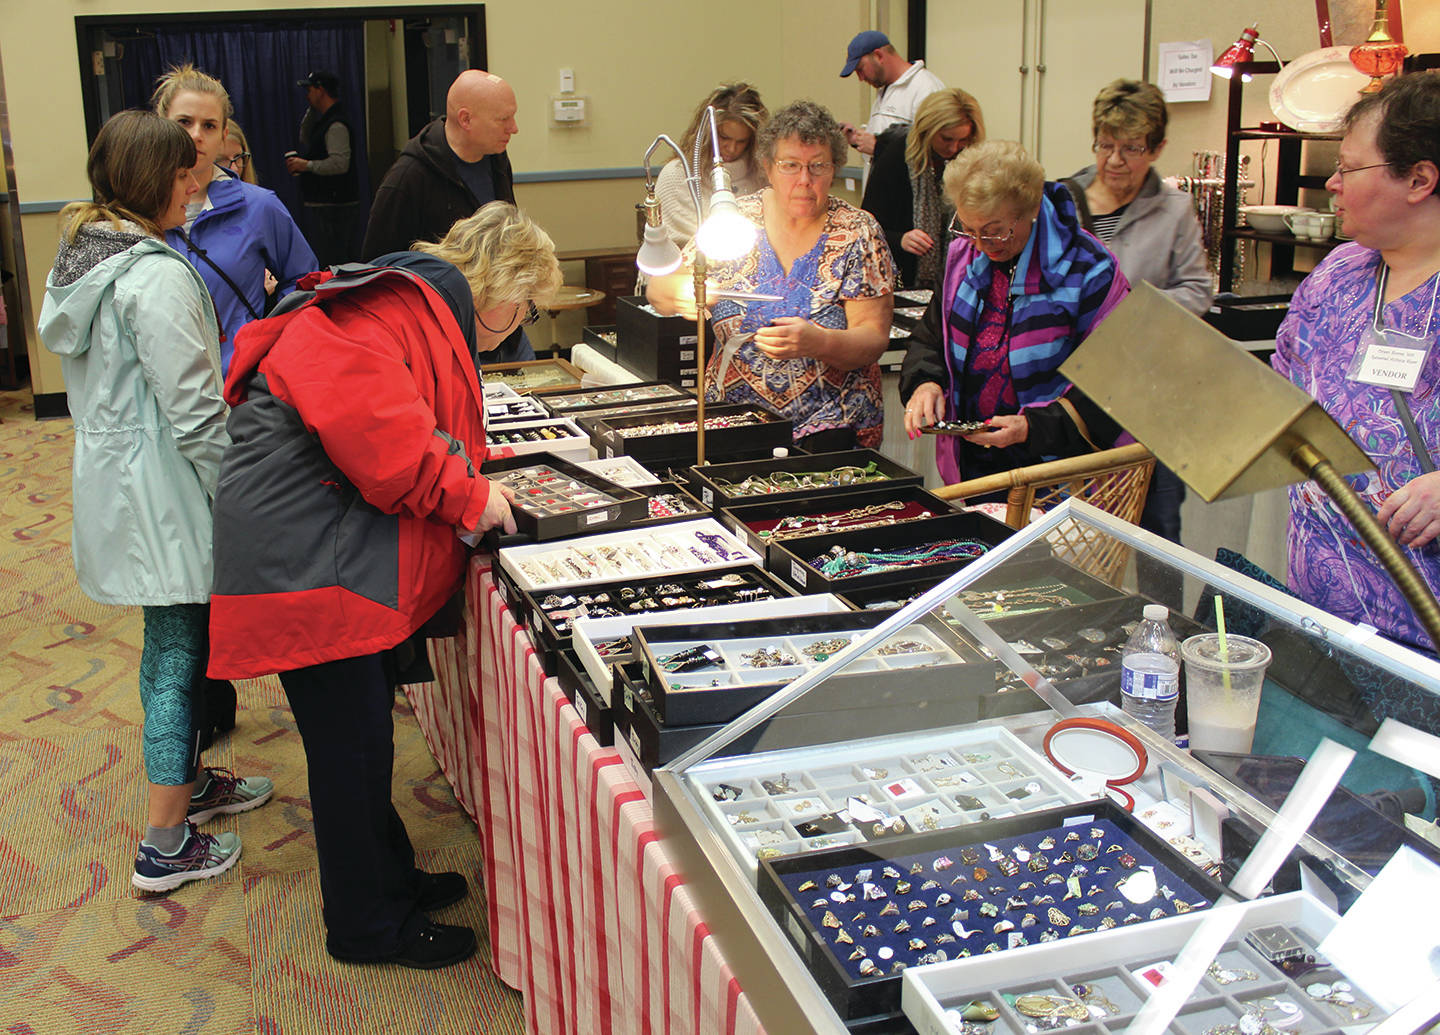 Renewed Antique Show revisits the Convention Center